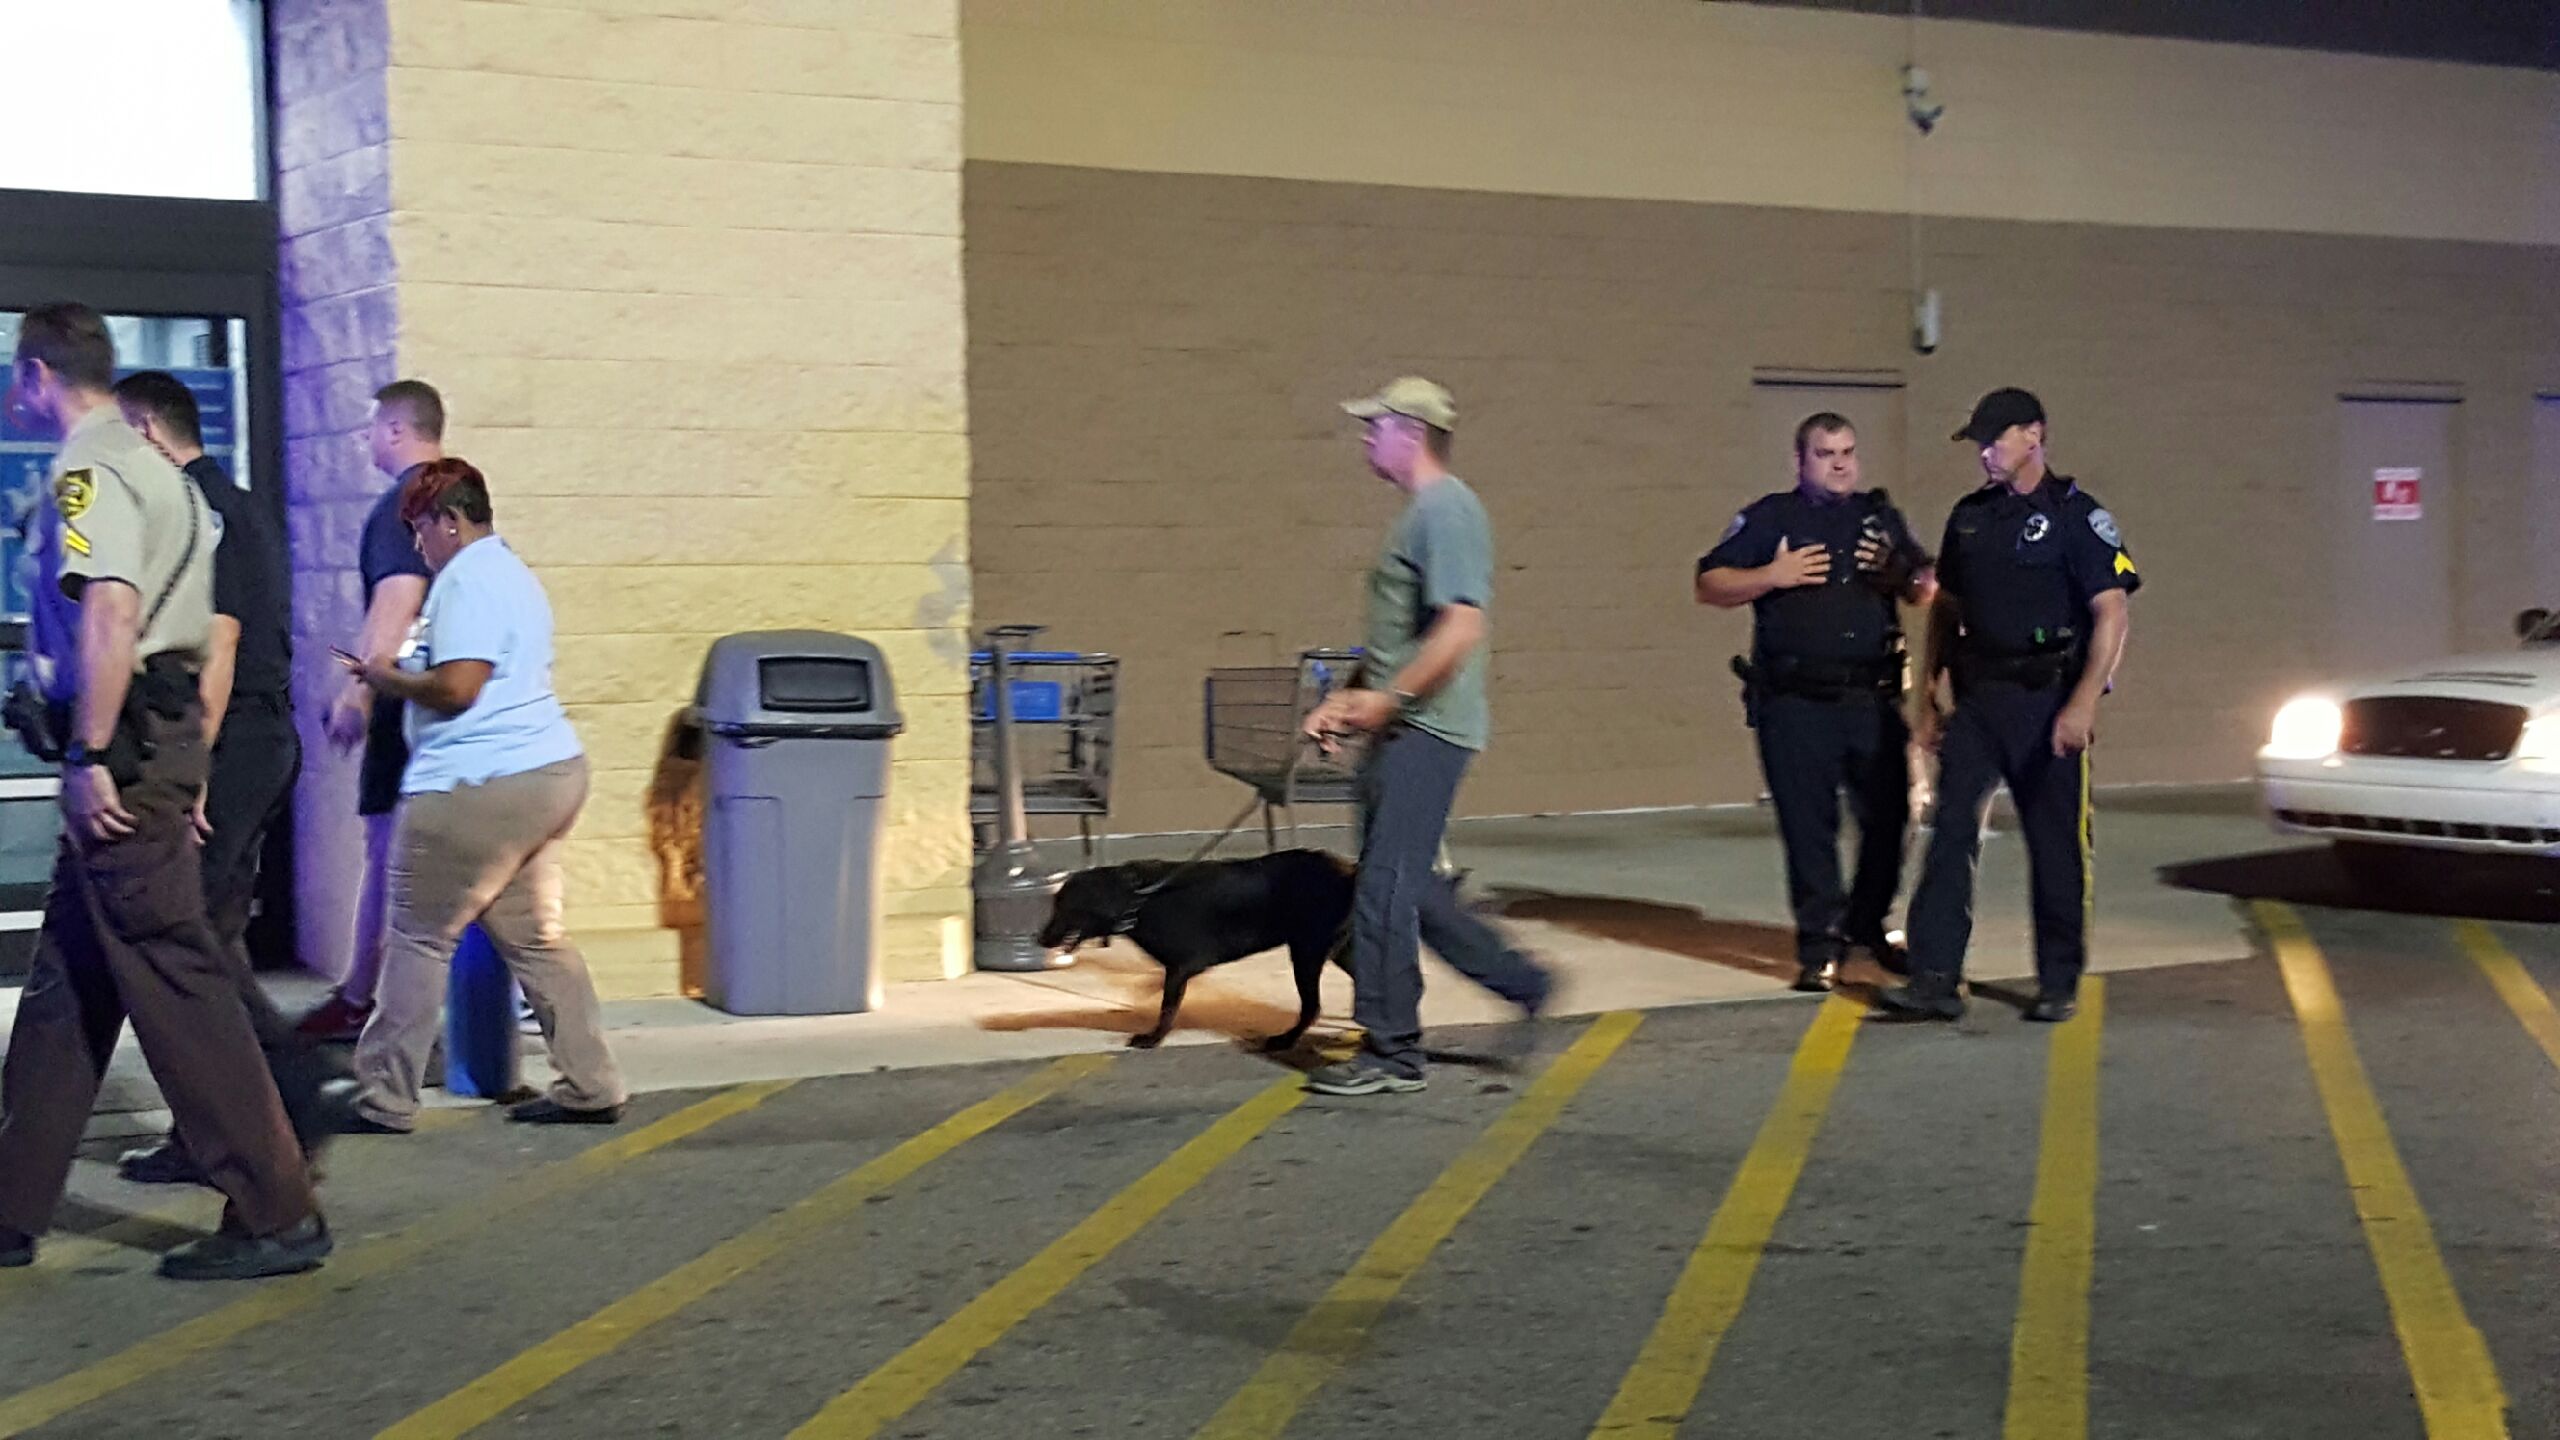 Trussville Walmart given all clear after bomb threat 